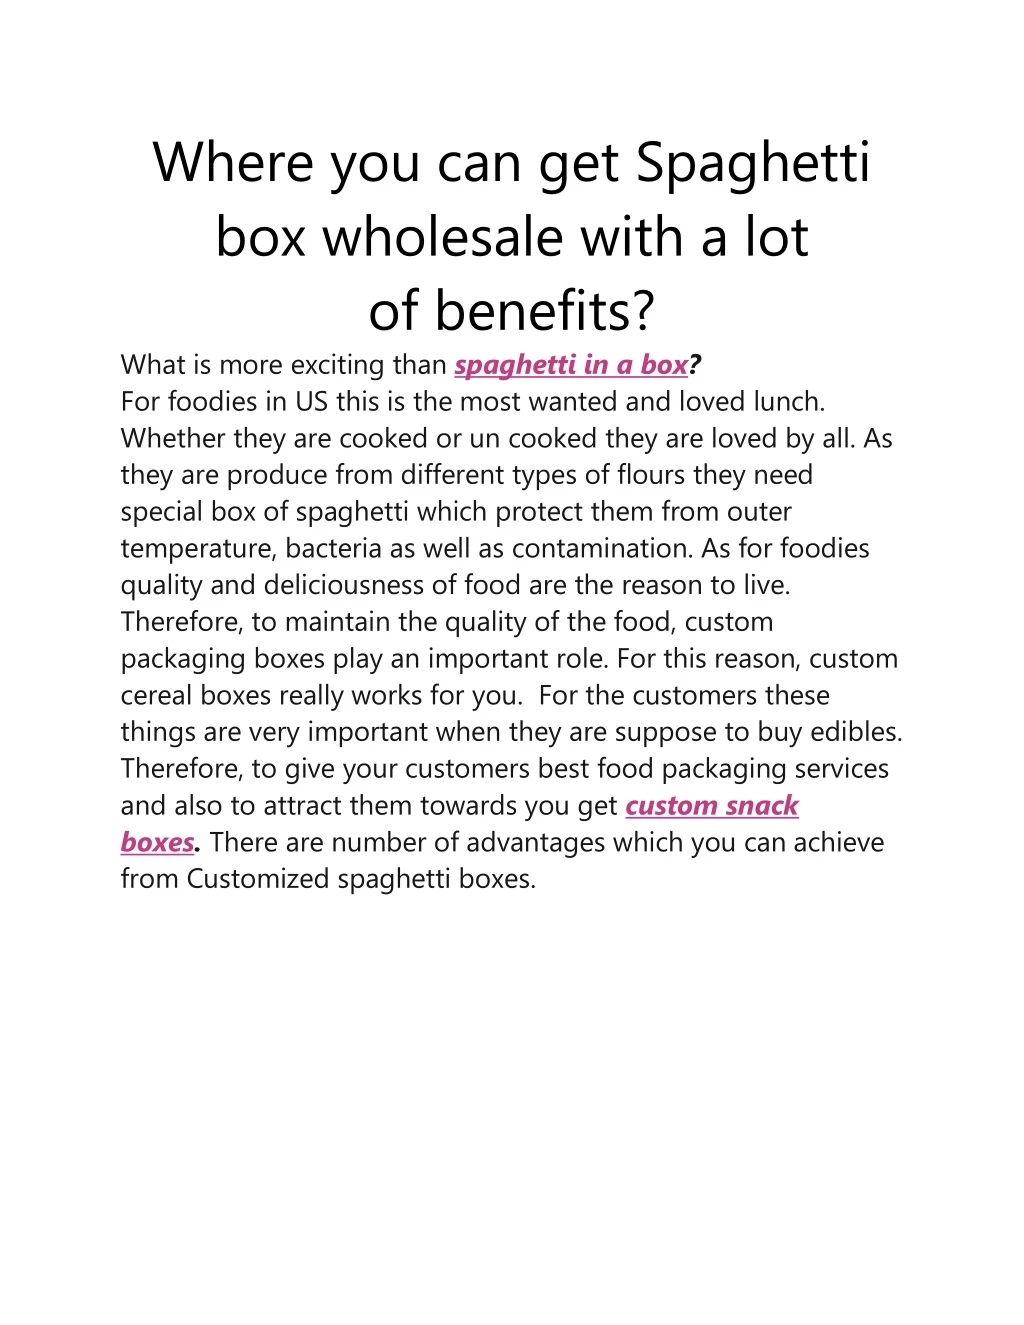 where you can get spaghetti box wholesale with